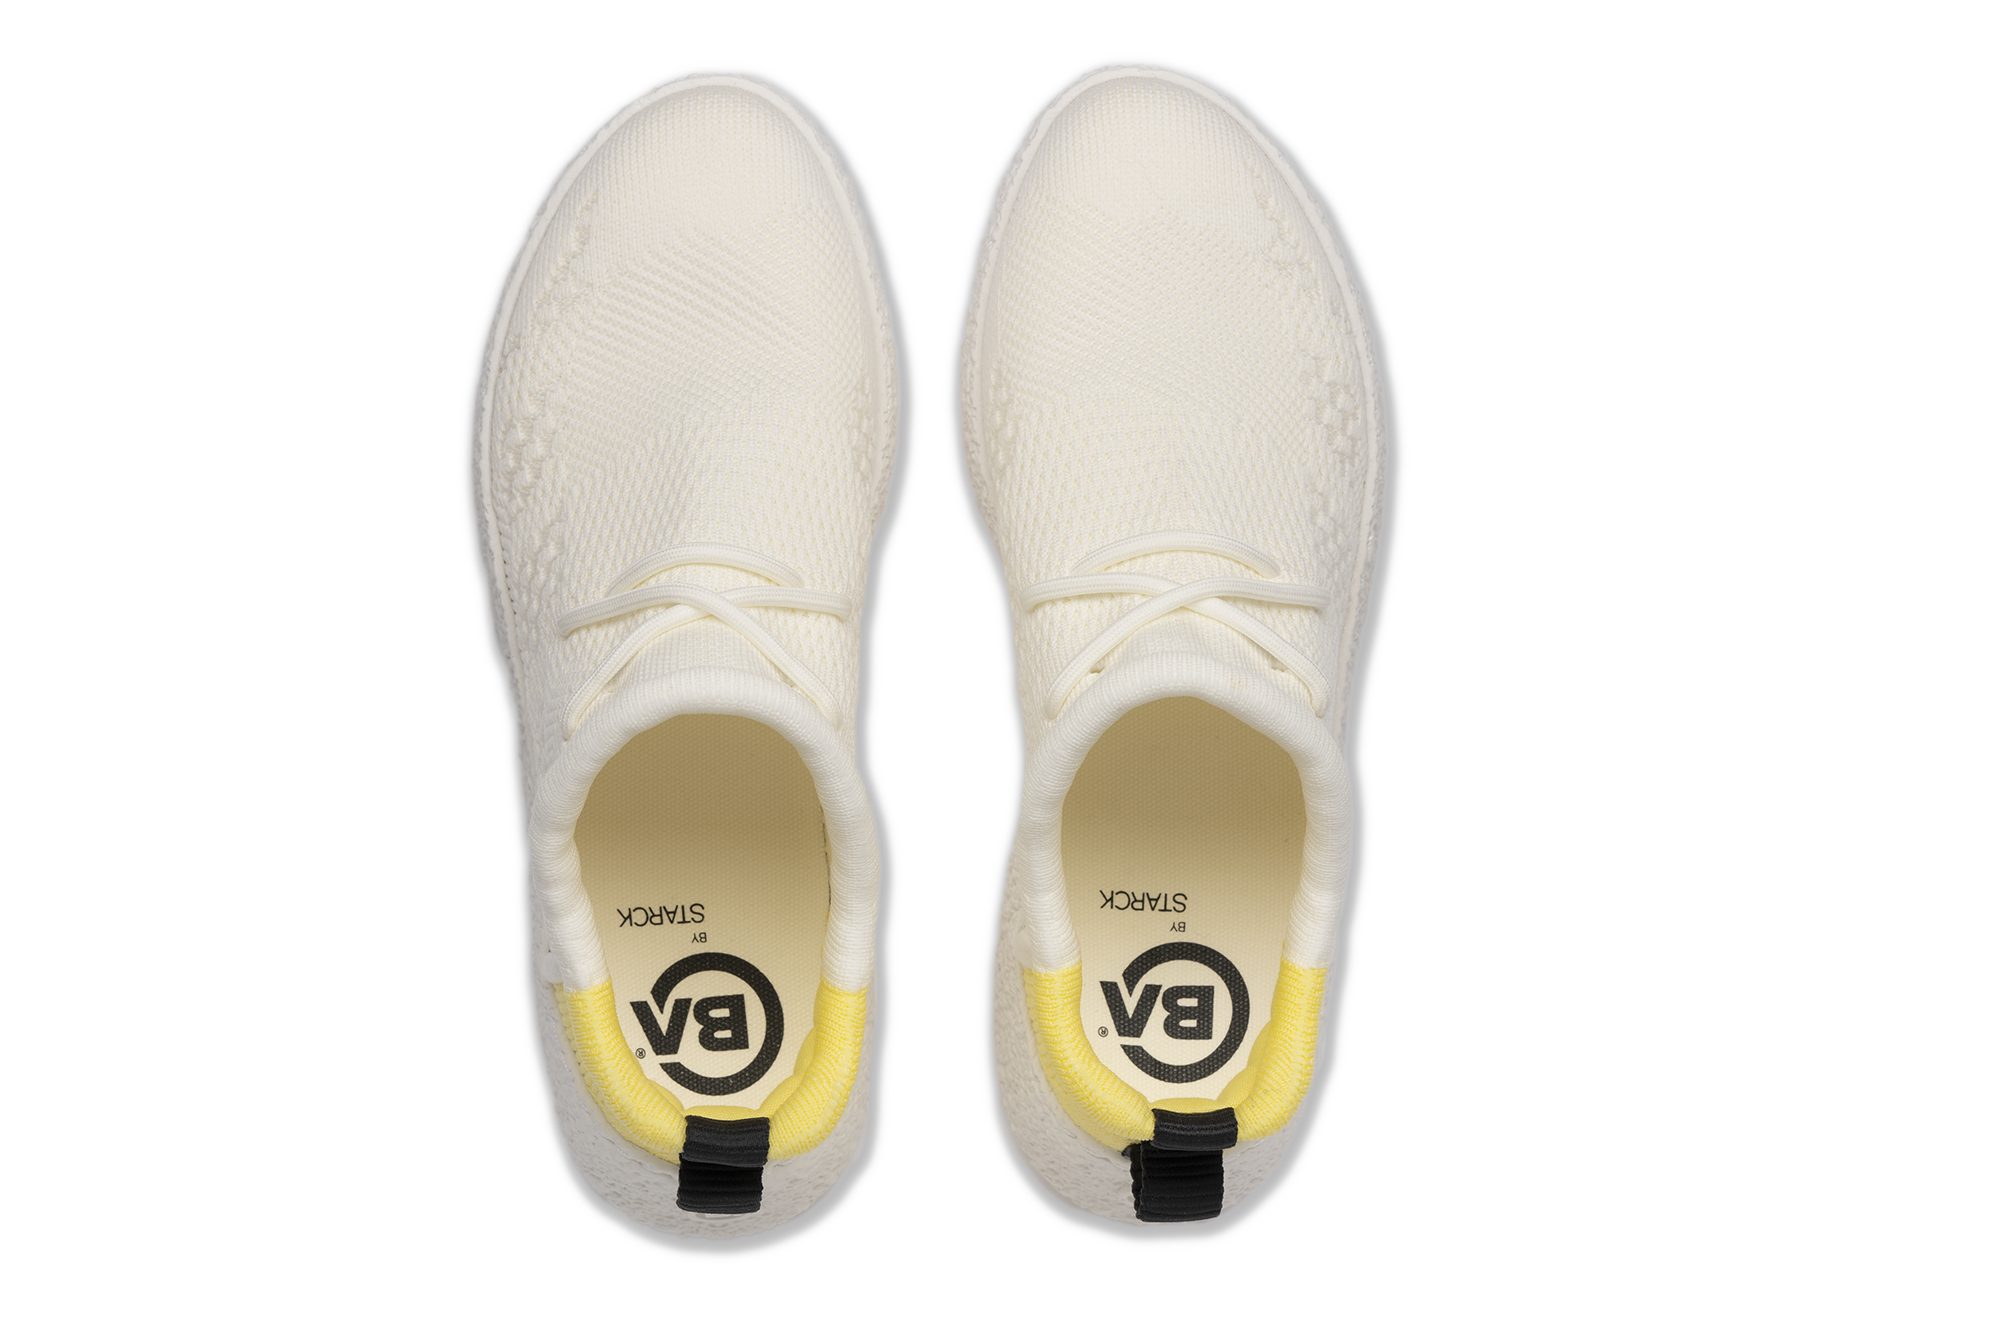 Top view of yellow/white Baliston Smart Shoes